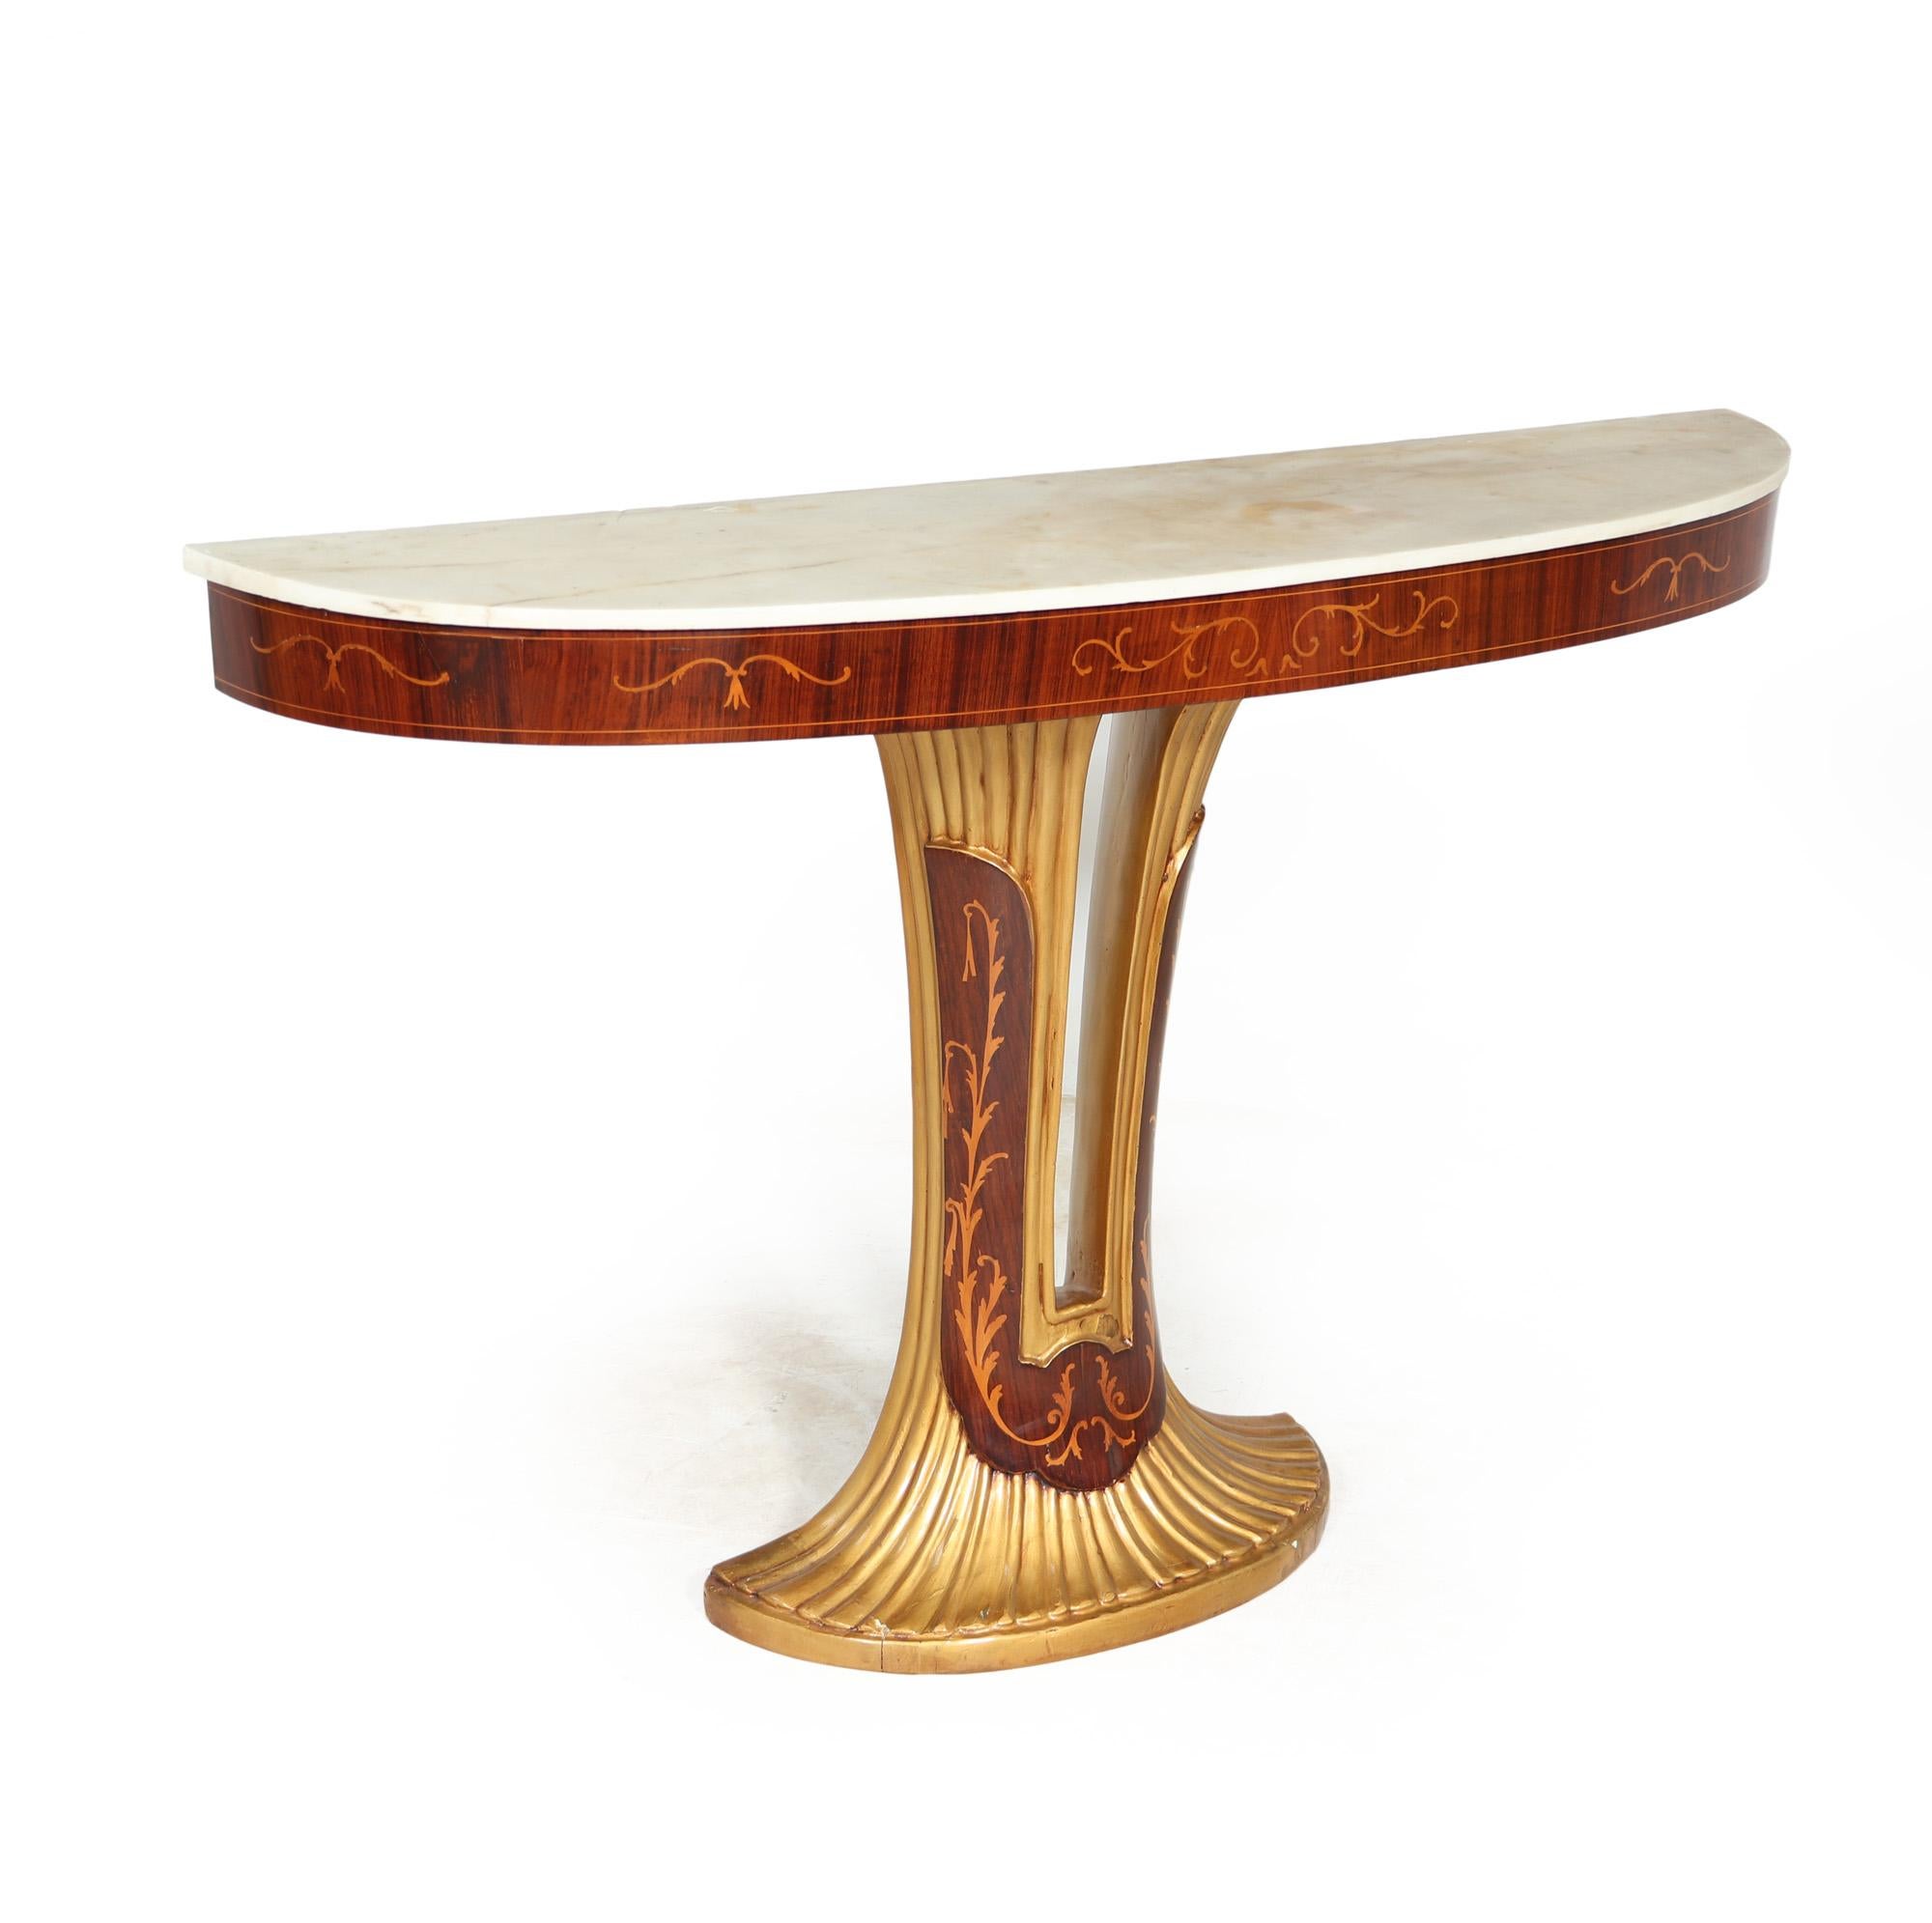 ART DECO CONSOLE TABLE 
A pretty inlaid console table produced in Italy in the 1940’s with original white marble onyx top, beautiful flowing design and with great attention to detail. The console table has had light restorations and carefully